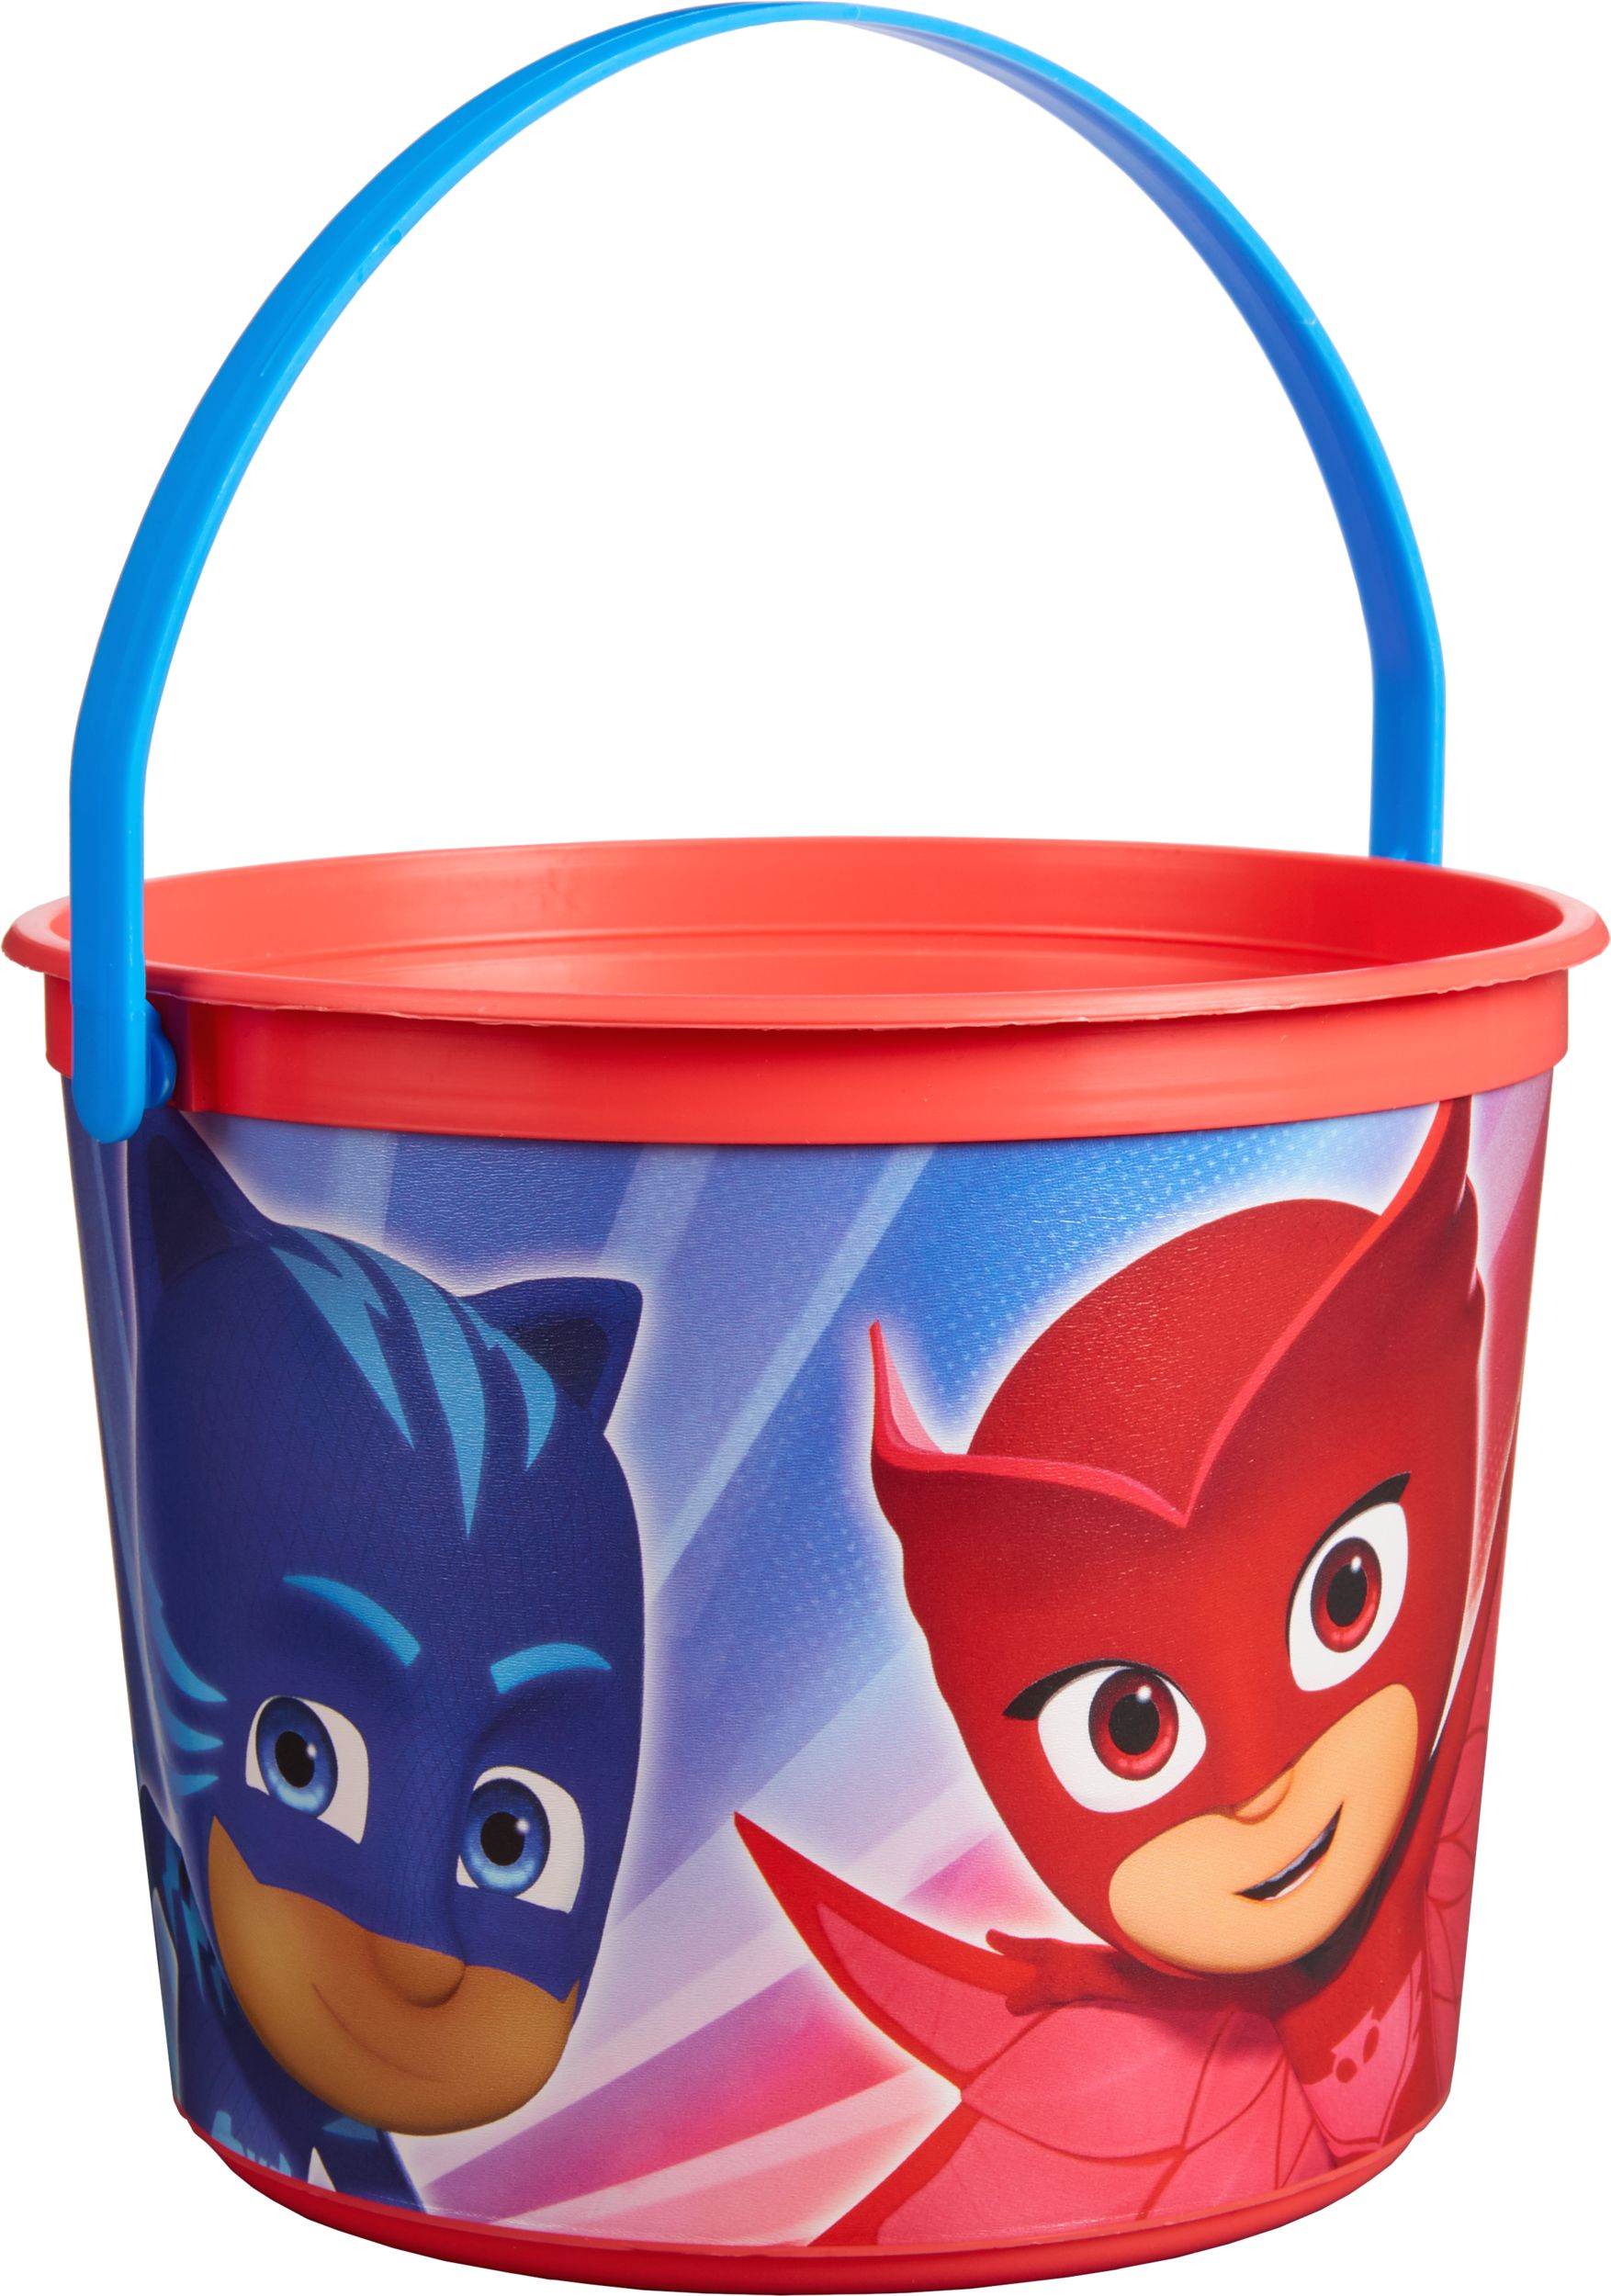 PJ Masks - Need some gift inspo for a PJ Masks Super Fan? Check out these  Super Savings! Up to 30% off select PJ Masks Toys ✨ Shop now:  go.hasb.ro/pjmasksdeals